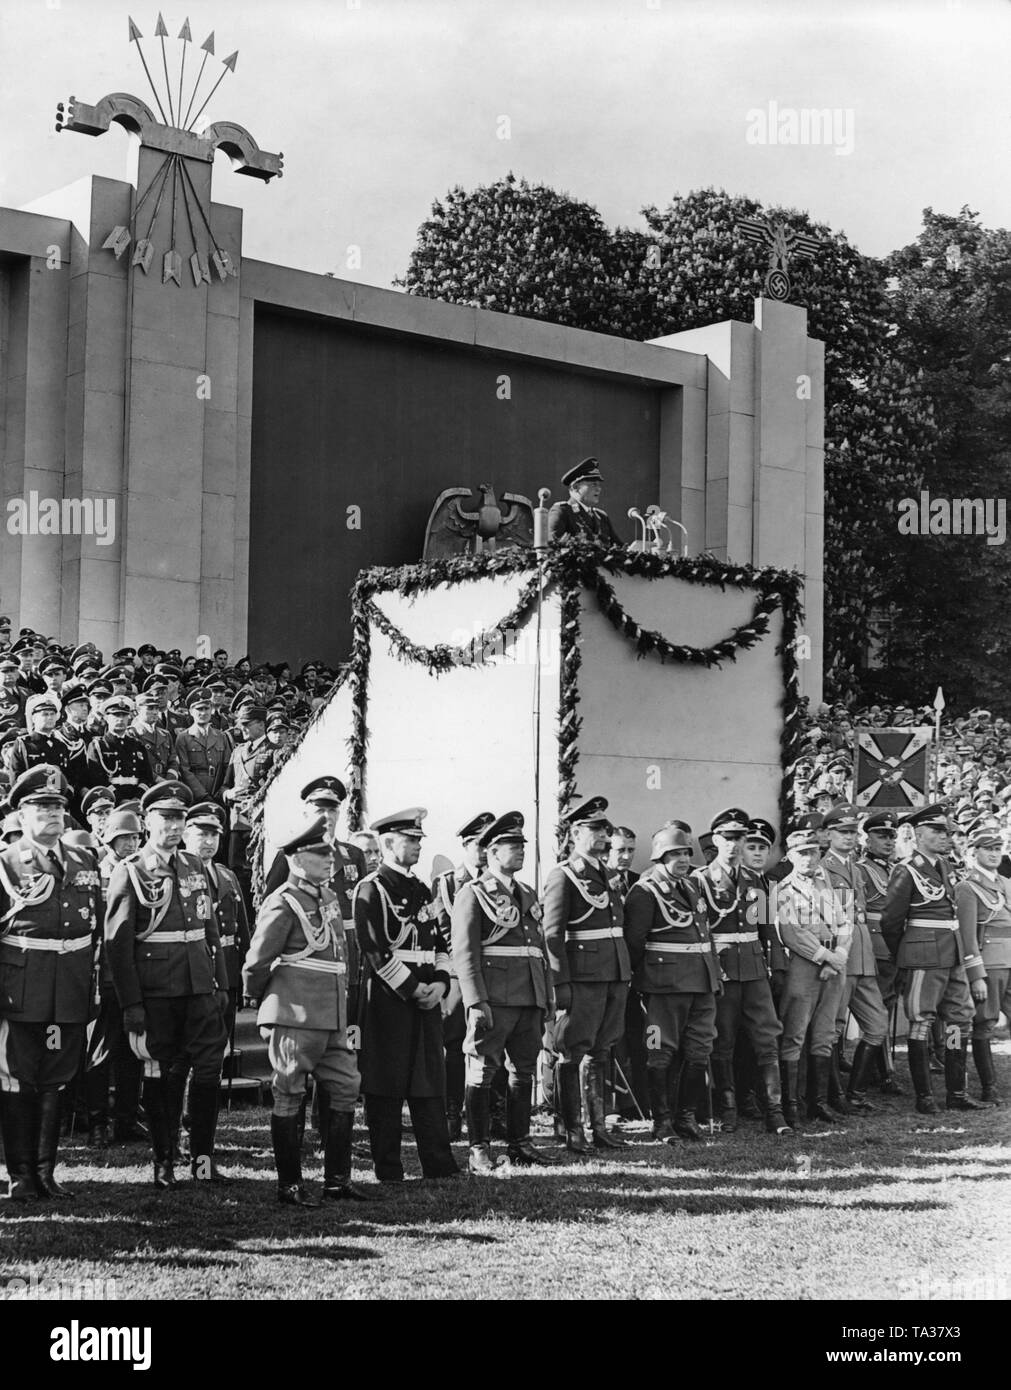 Photo of Field Marshal General Hermann Goering (commander-in-chief of the Luftwaffe) on the lectern during a speech on the occasion of a victory parade of the Condor Legion in the Hamburg Moorweide at the Dammtor, on the 30th of May, 1939. In the first row from left: General der Flieger Hugo Sperrle, General der Flieger Hellmuth Volkmann, General of the Cavalry Wilhelm Knochenhauer, General Admiral Conrad Albrecht and Colonel-General Erhard Milch. In the upper left corner of the photo, the symbol of the Spanish Fascist Party, the Falange Espanola (arrows and yoke). Stock Photo